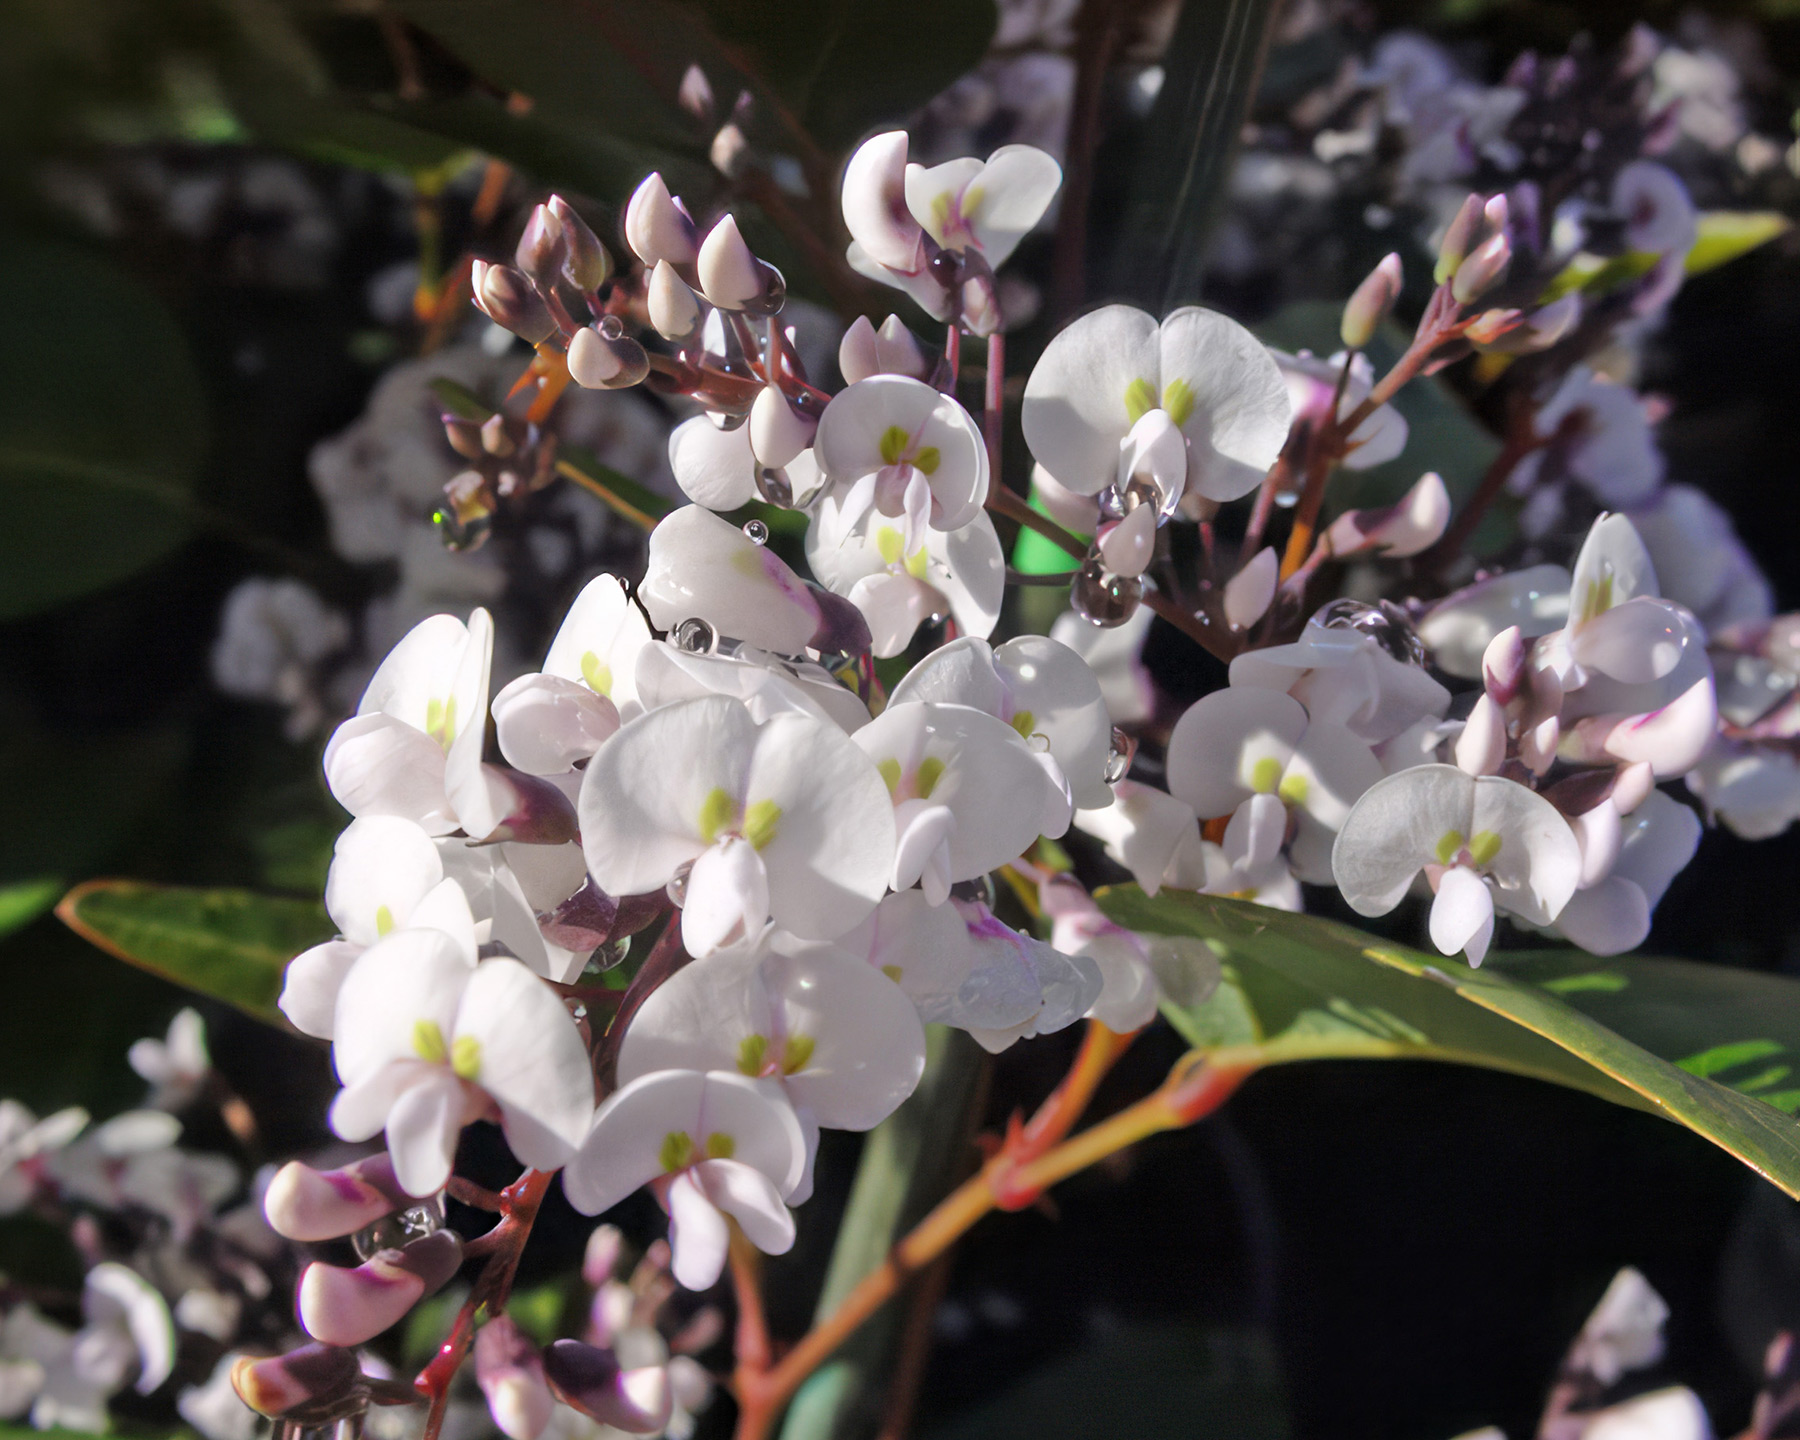 Hardenbergia violacea - this is Free and Easy